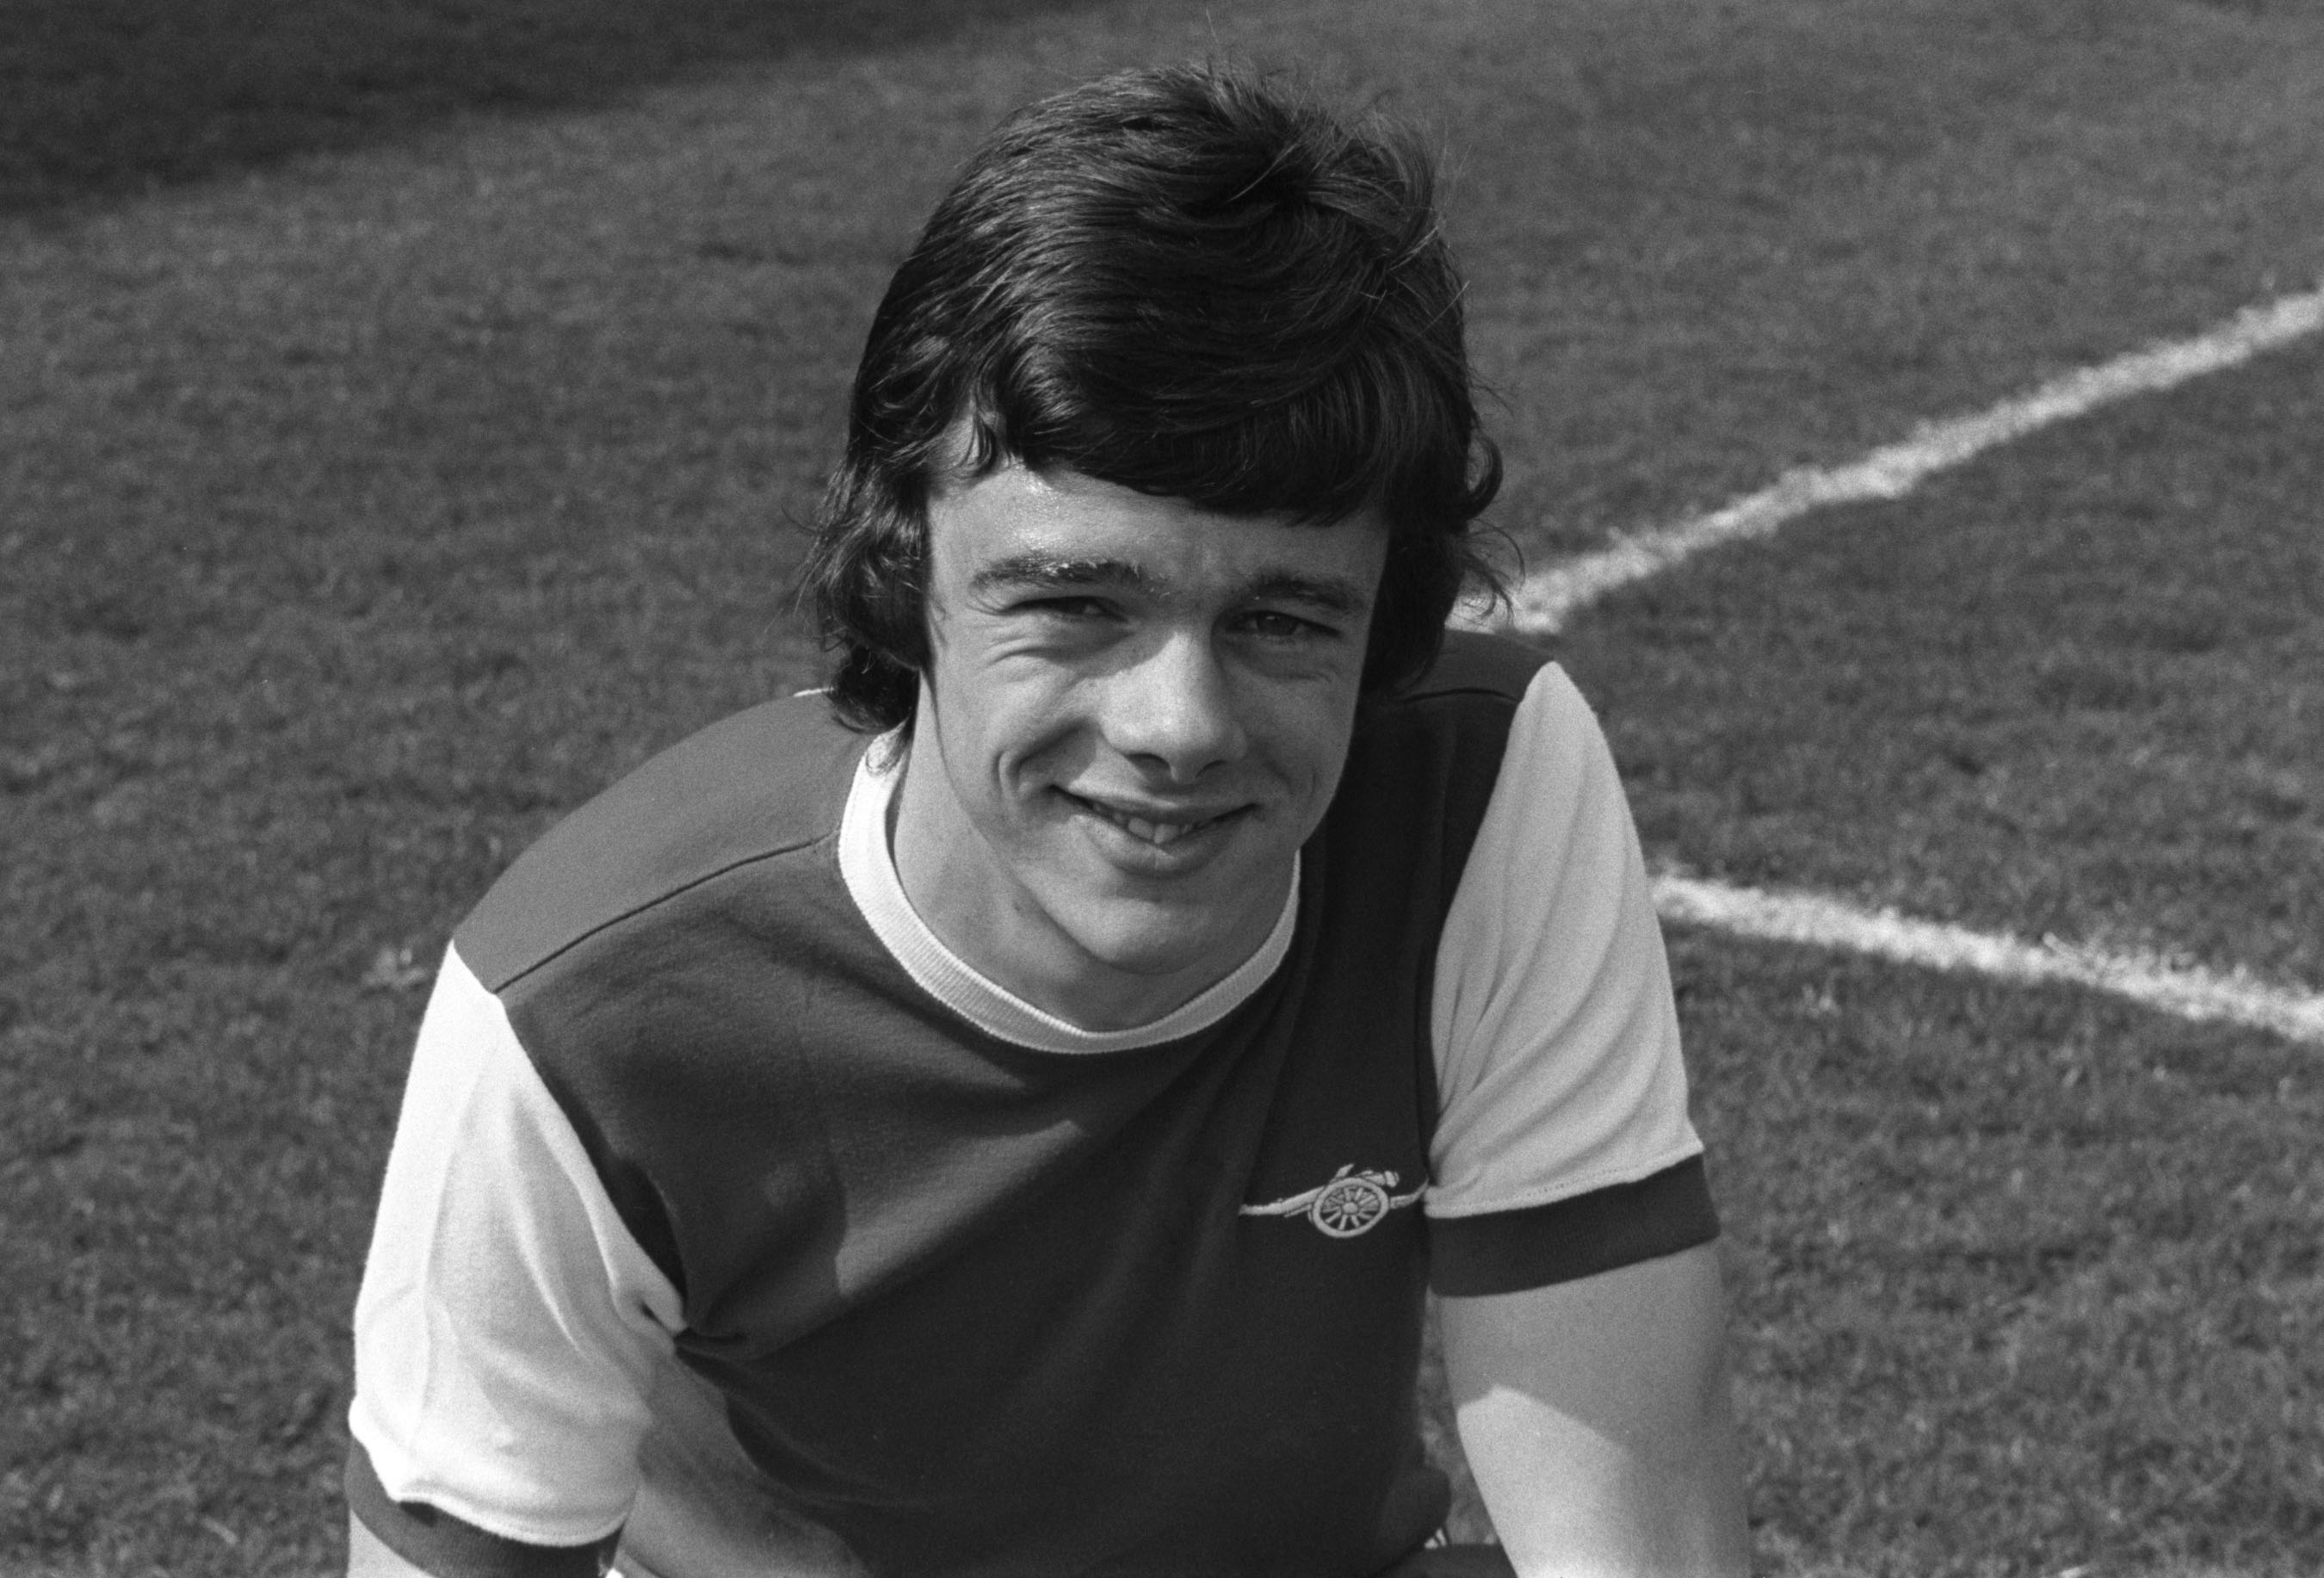 Arsenal vs Burnley: REWIND to the day David O'Leary made his debut for the Gunners at Turf Moor in 1975